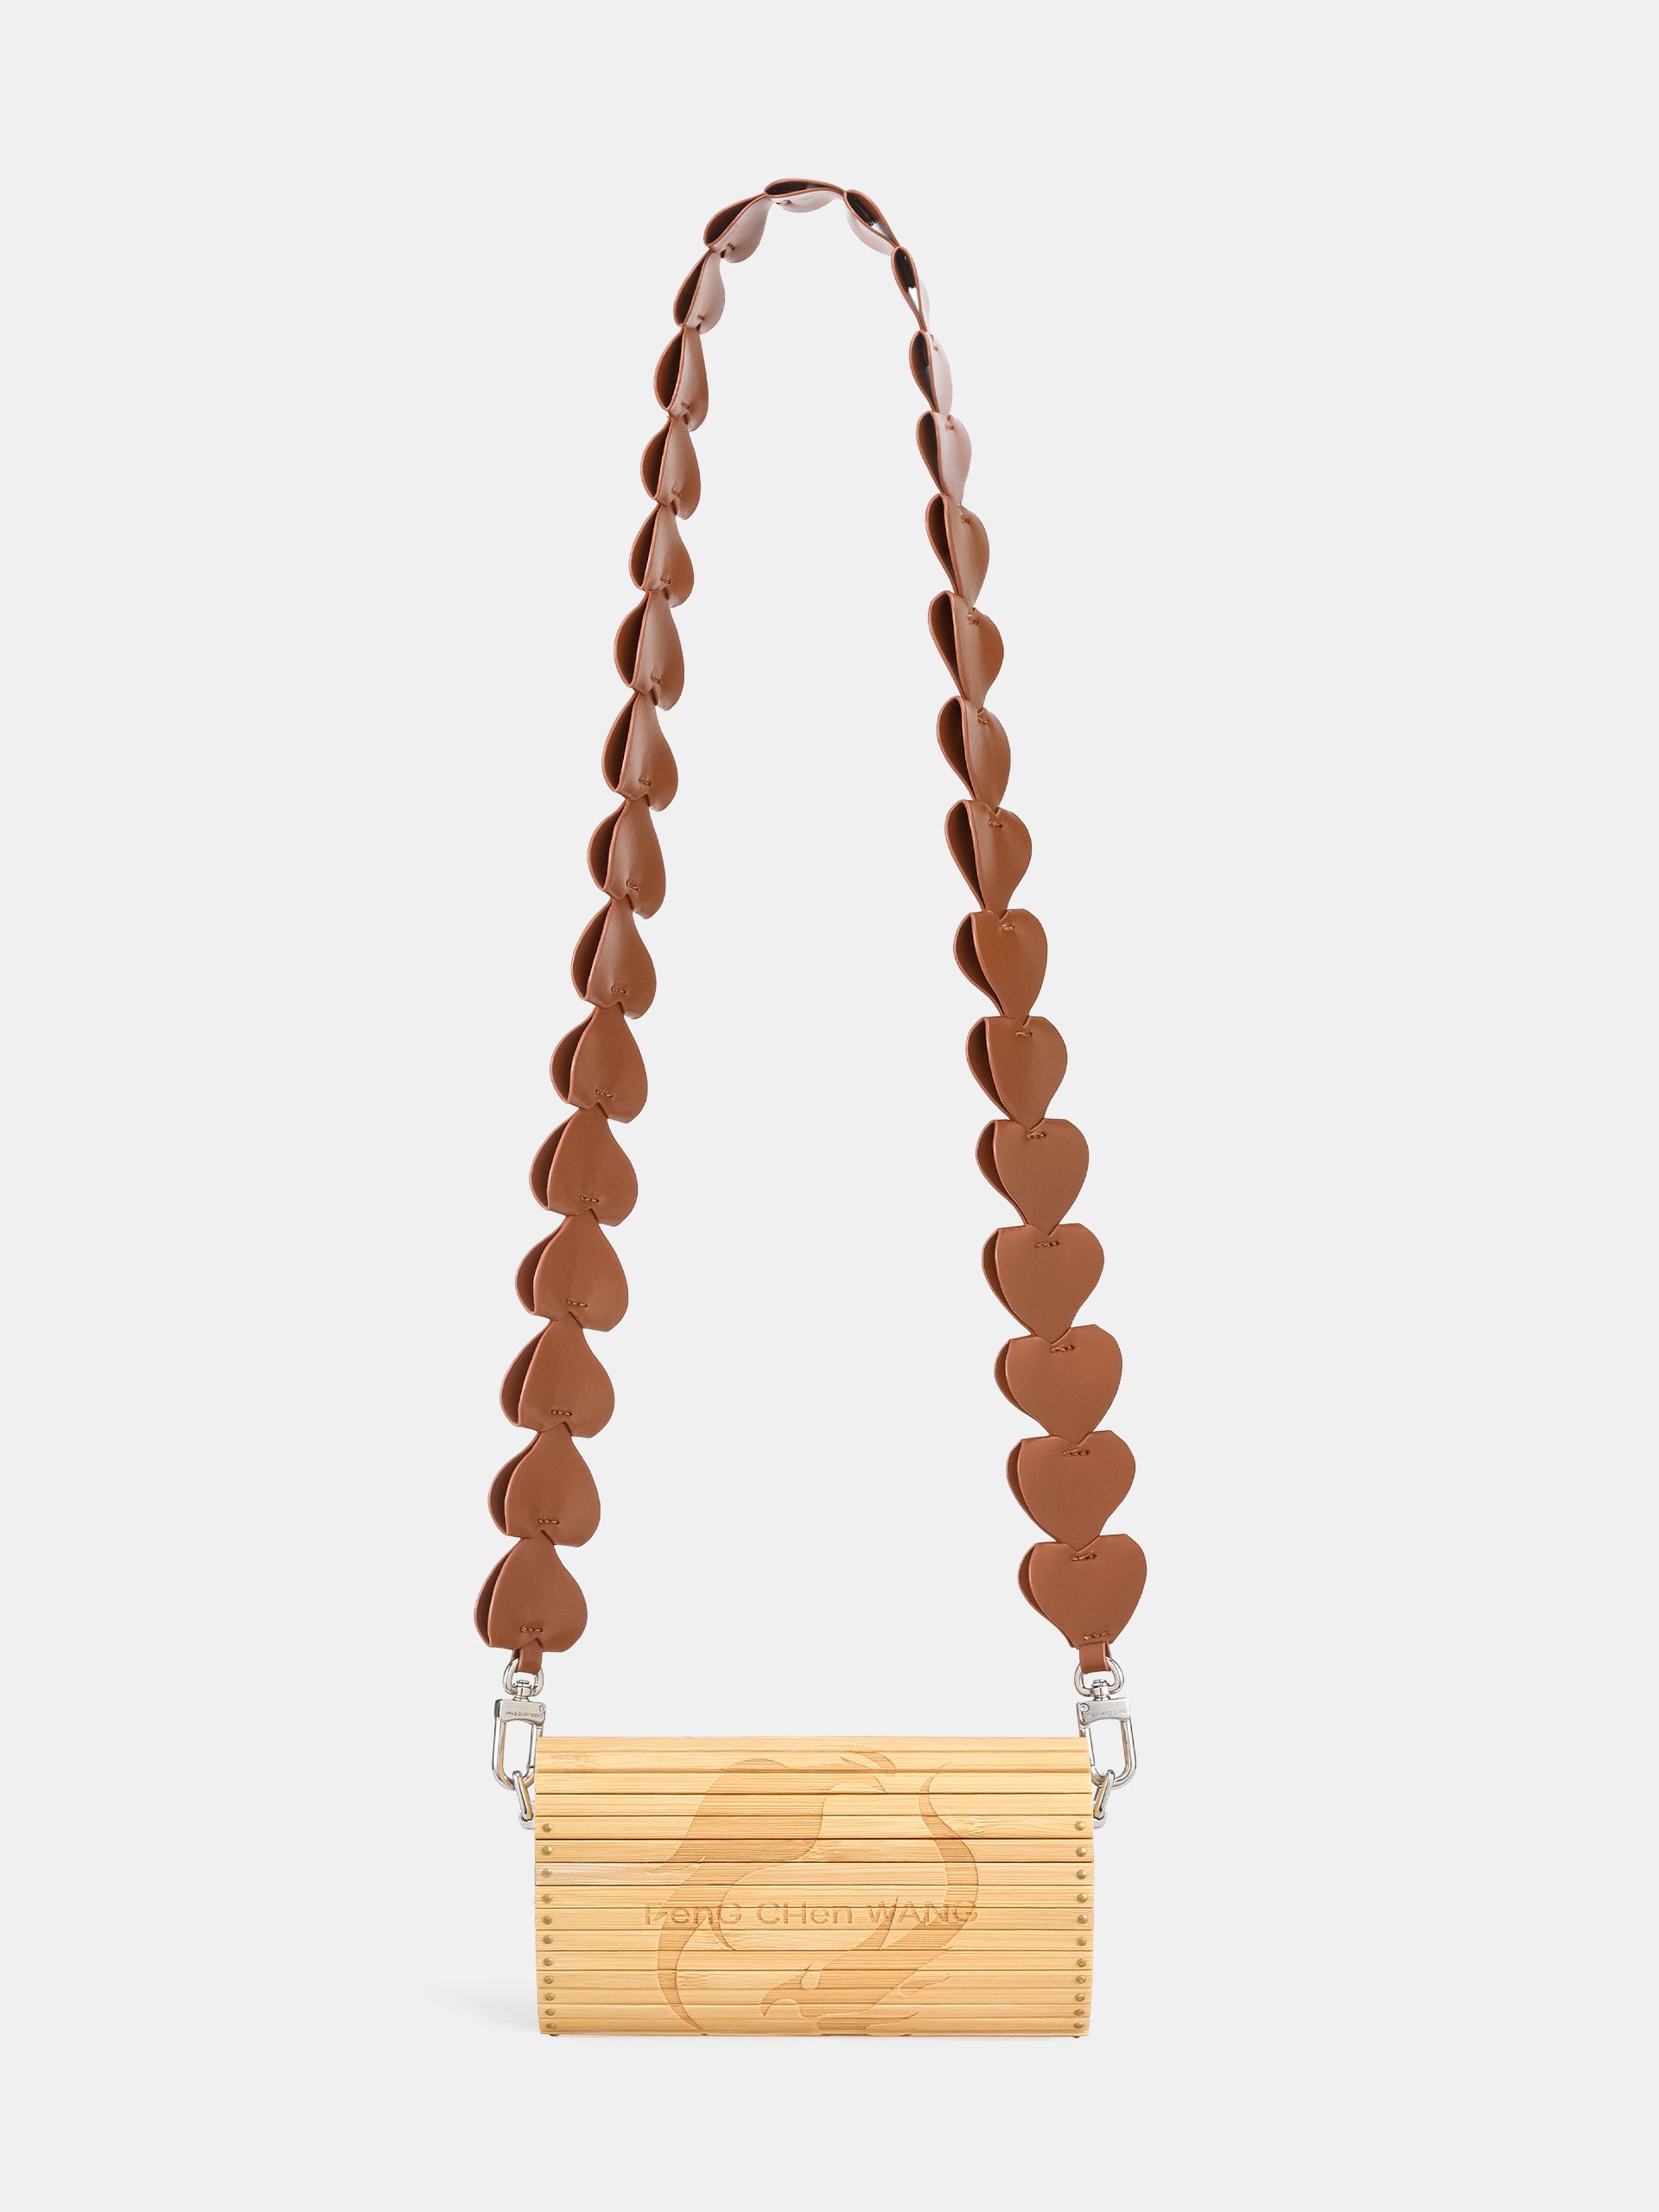 Feng Chen Wang bamboo faux-leather shoulder bag - Brown